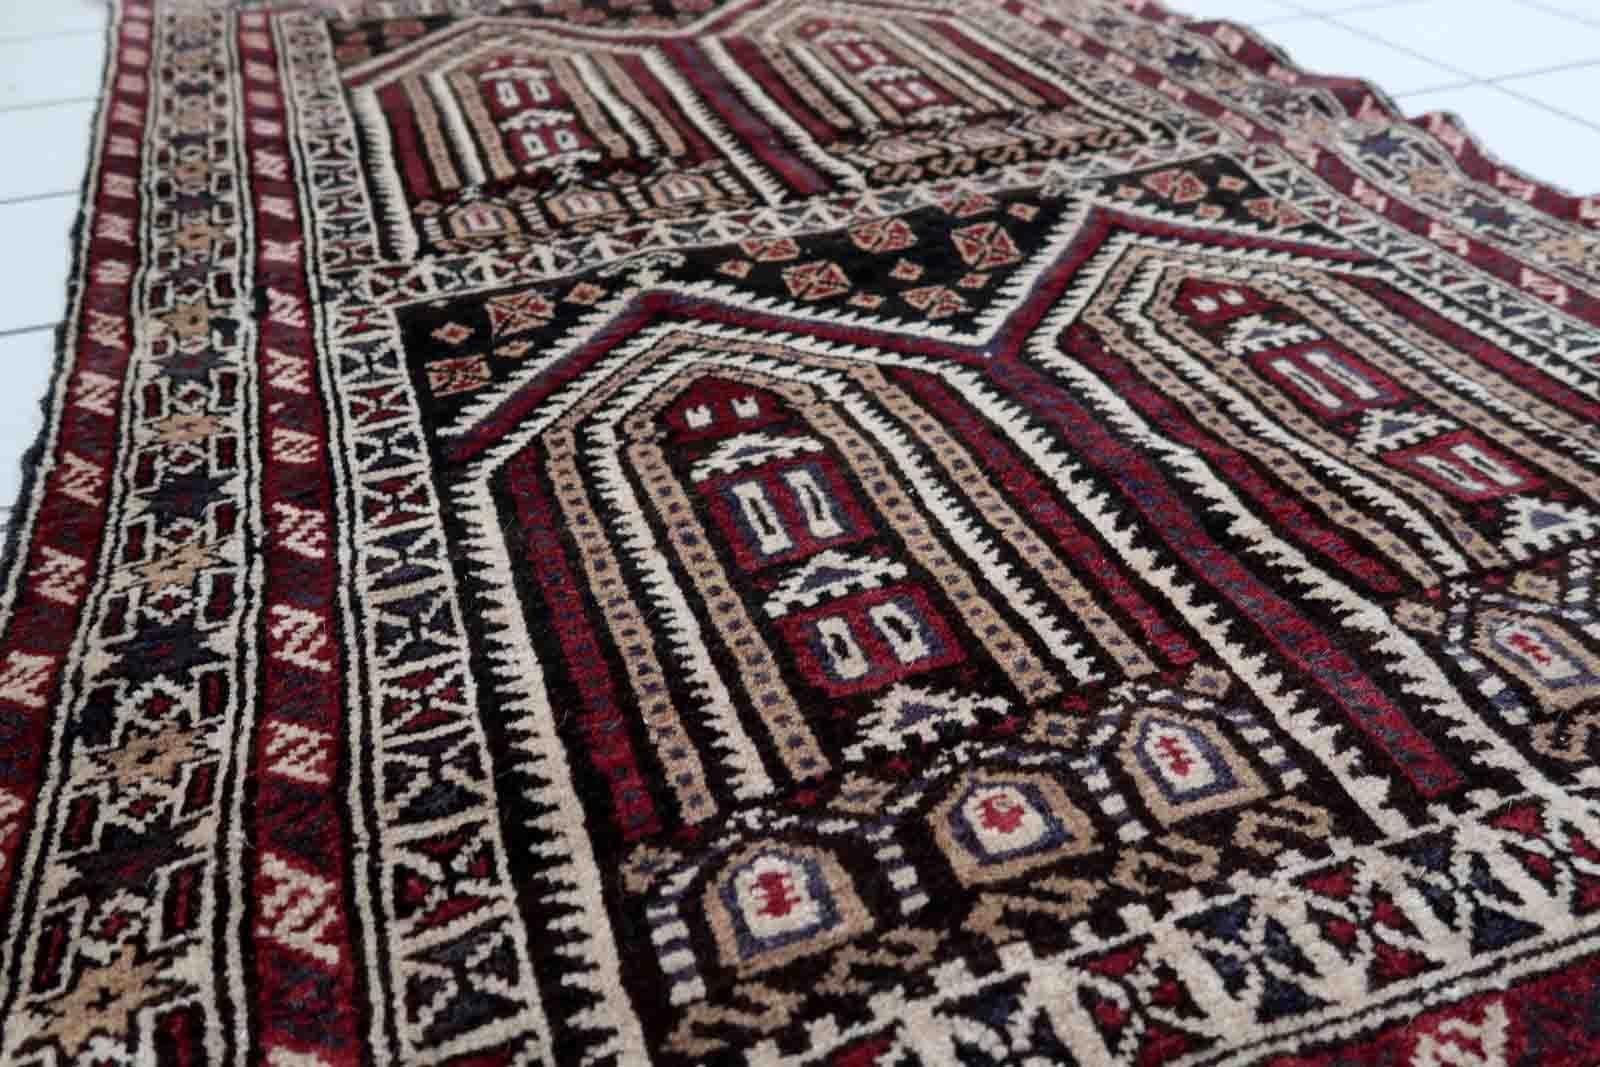 Handmade vintage Afghan Baluch rug in unusual multi-praying design. The rug is from the end of 20th century made in wool.

-condition: original good,

-circa: 1970s,

-size: 3' x 4.6' (95cm x 142cm),
​
-material: wool,

-country of origin: